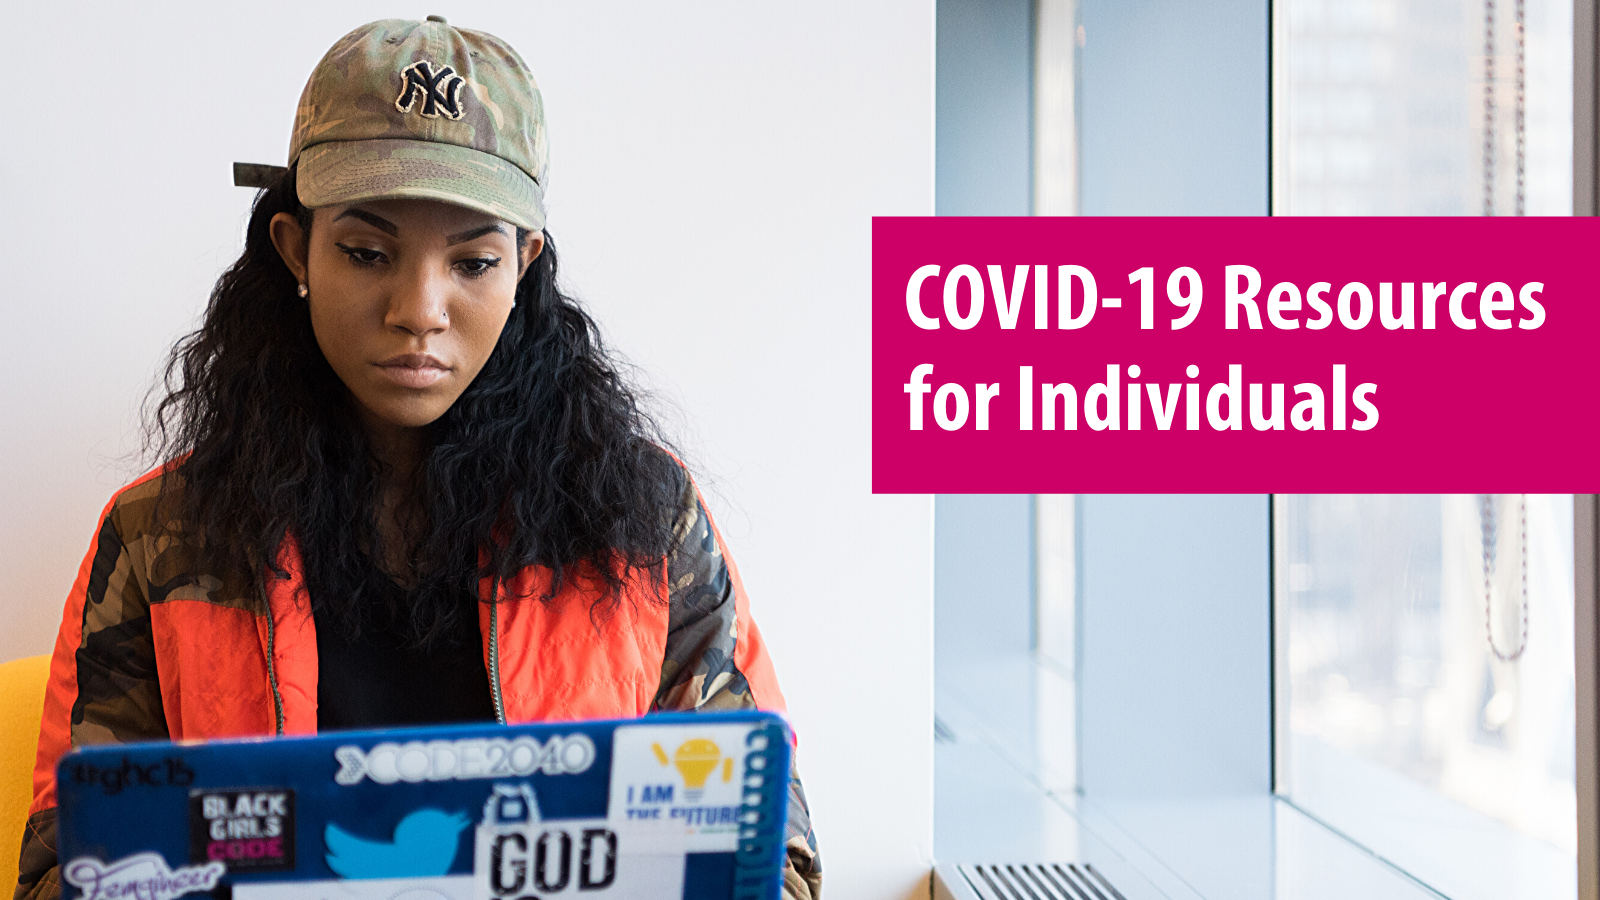 COVID-19 Resources for Individuals